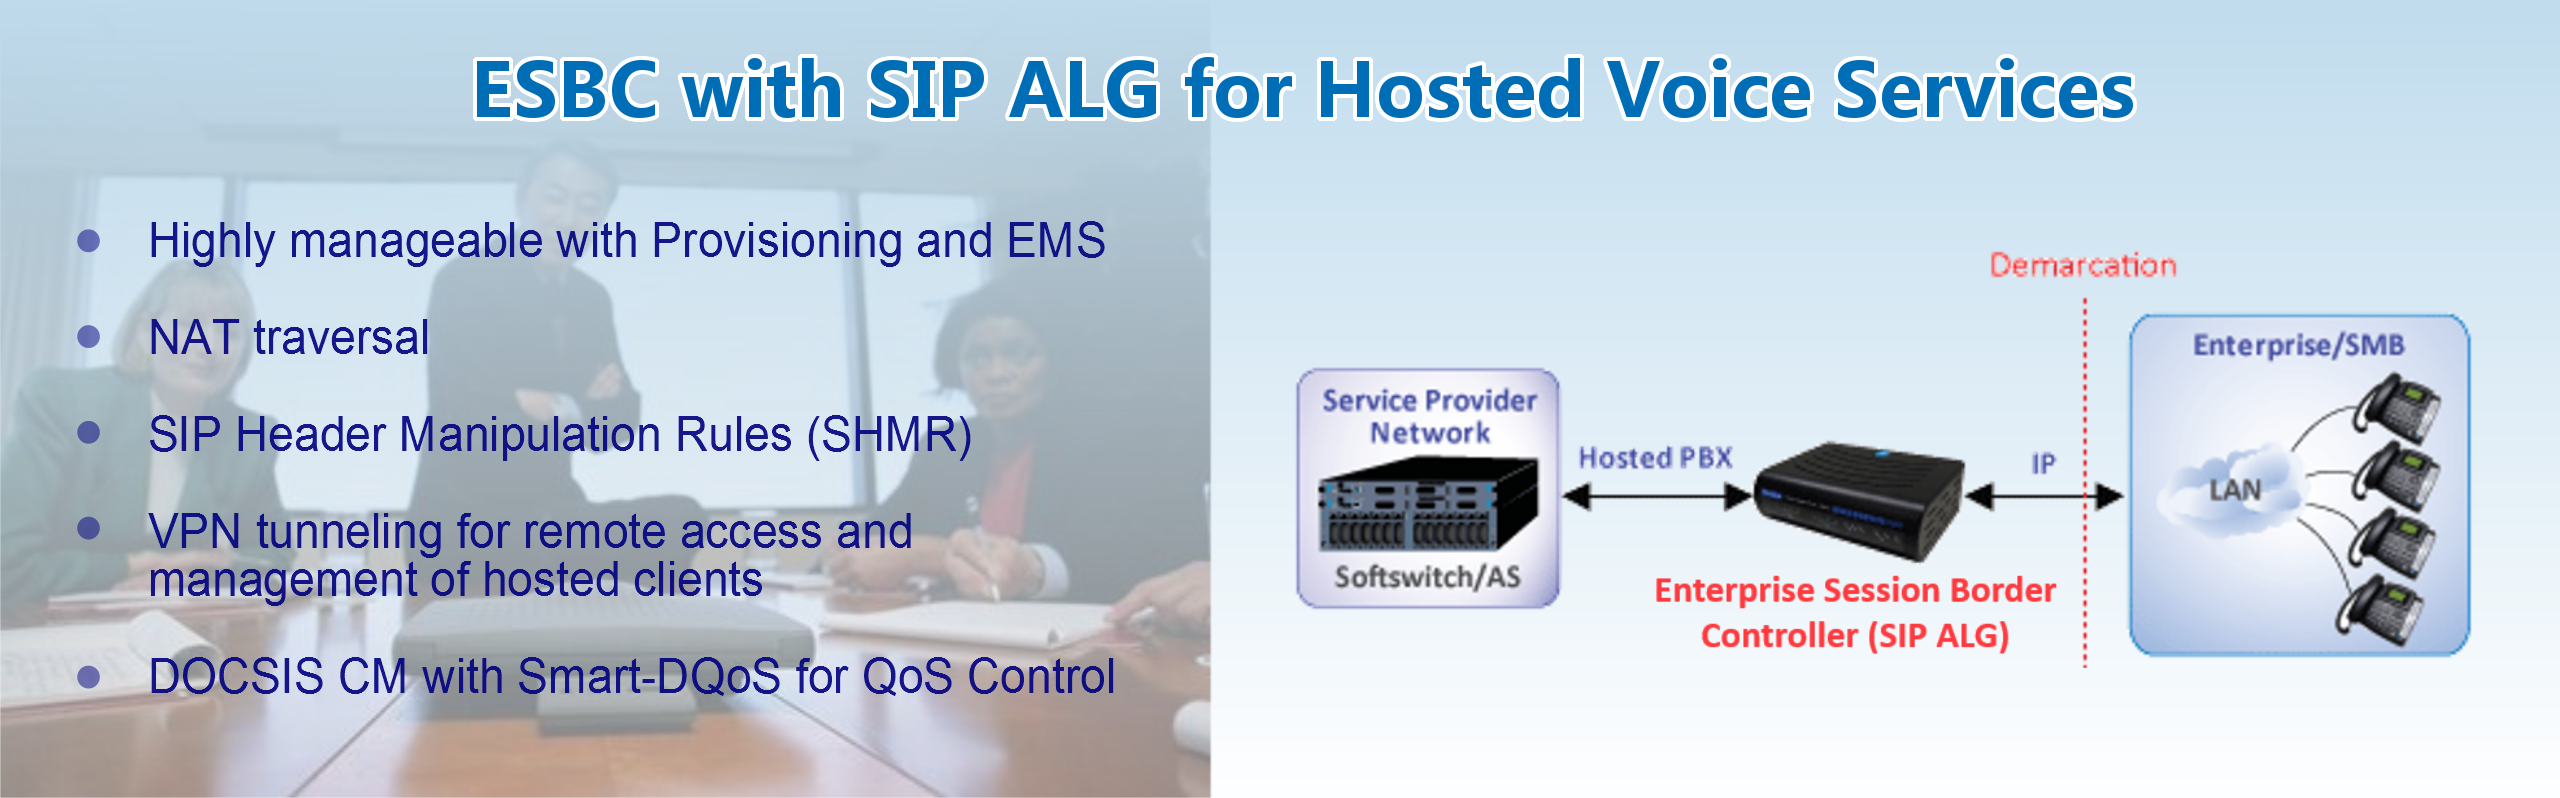 ESBC with SIP ALG for Hosted Voice Services